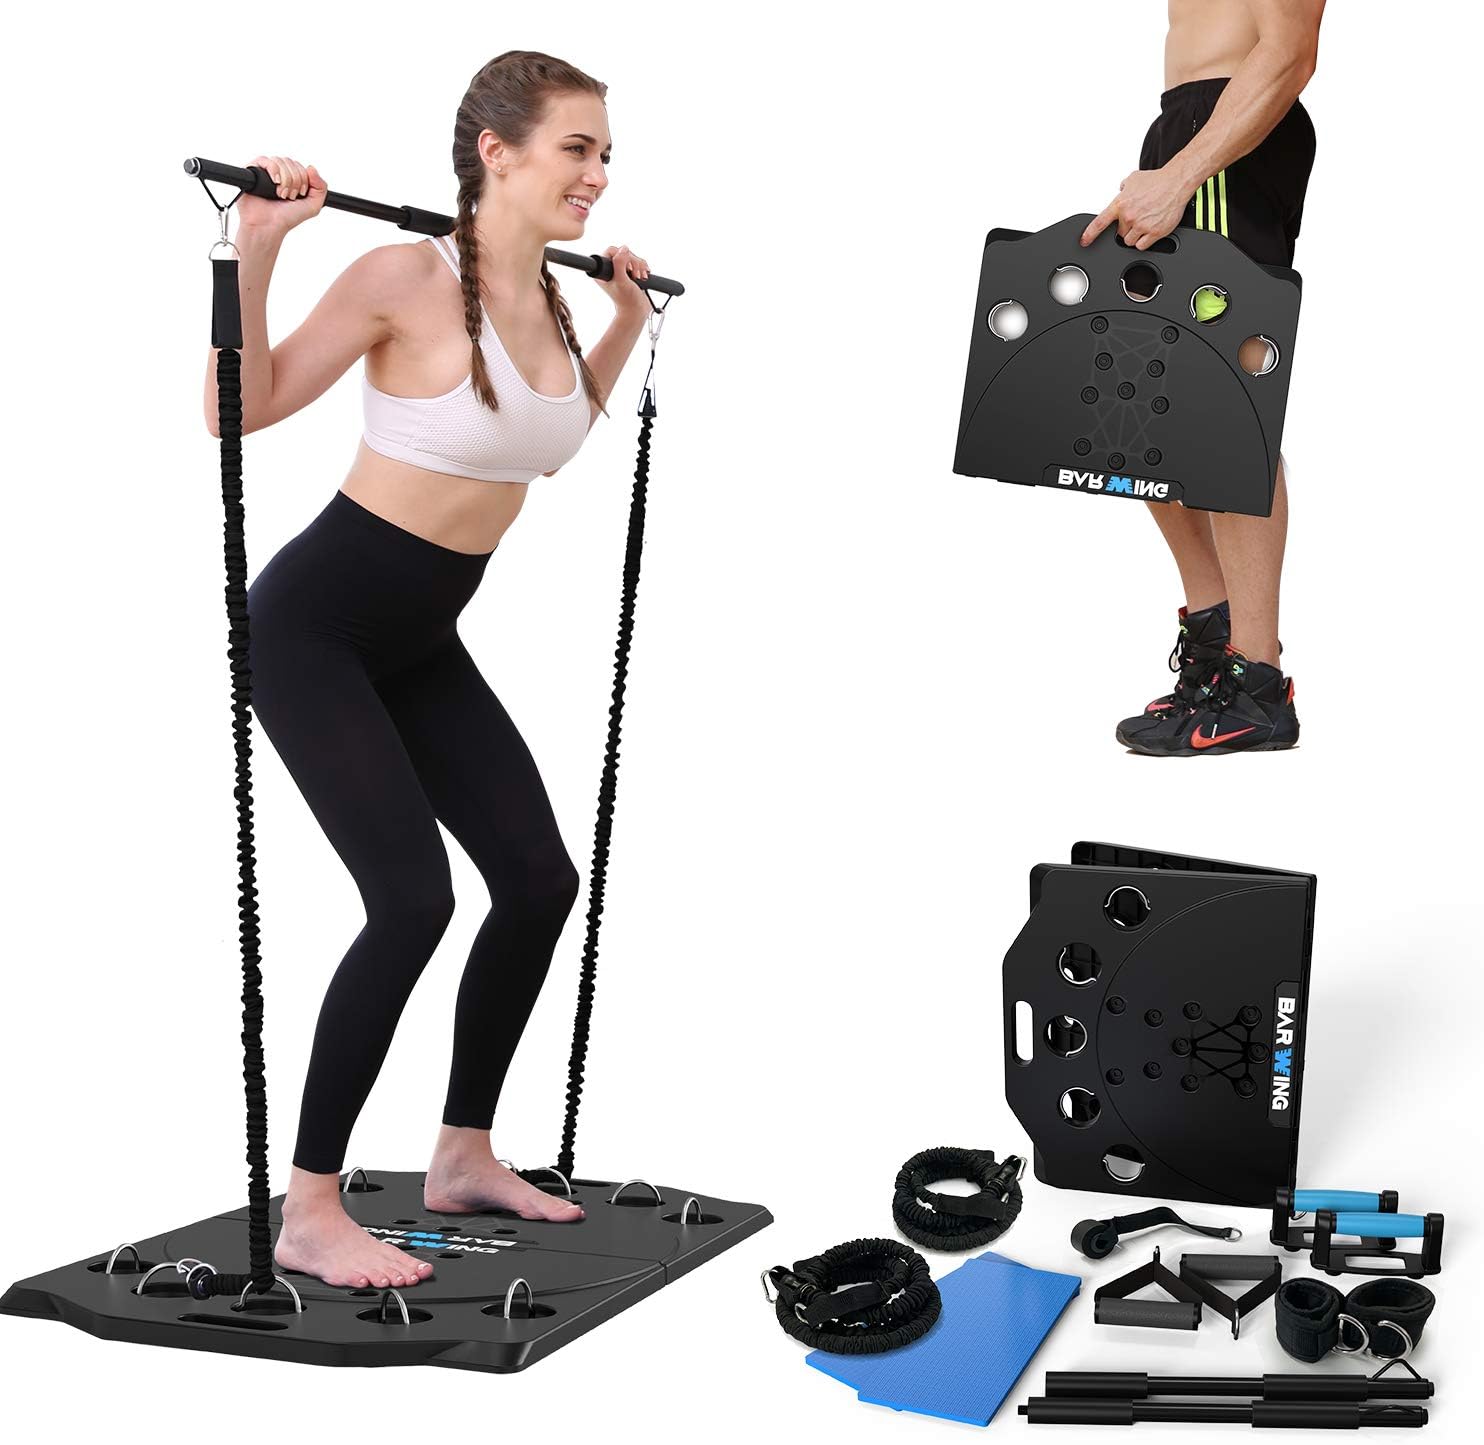 BARWING Portable Large Compact Push Up Board for Men 9 IN 1 Home Workout Equipment Push Up Bars Push Up Handles with Resistance Band Foldable Full Body Strength Training Machine Pilates Bar for Musle Exercise Gift Women